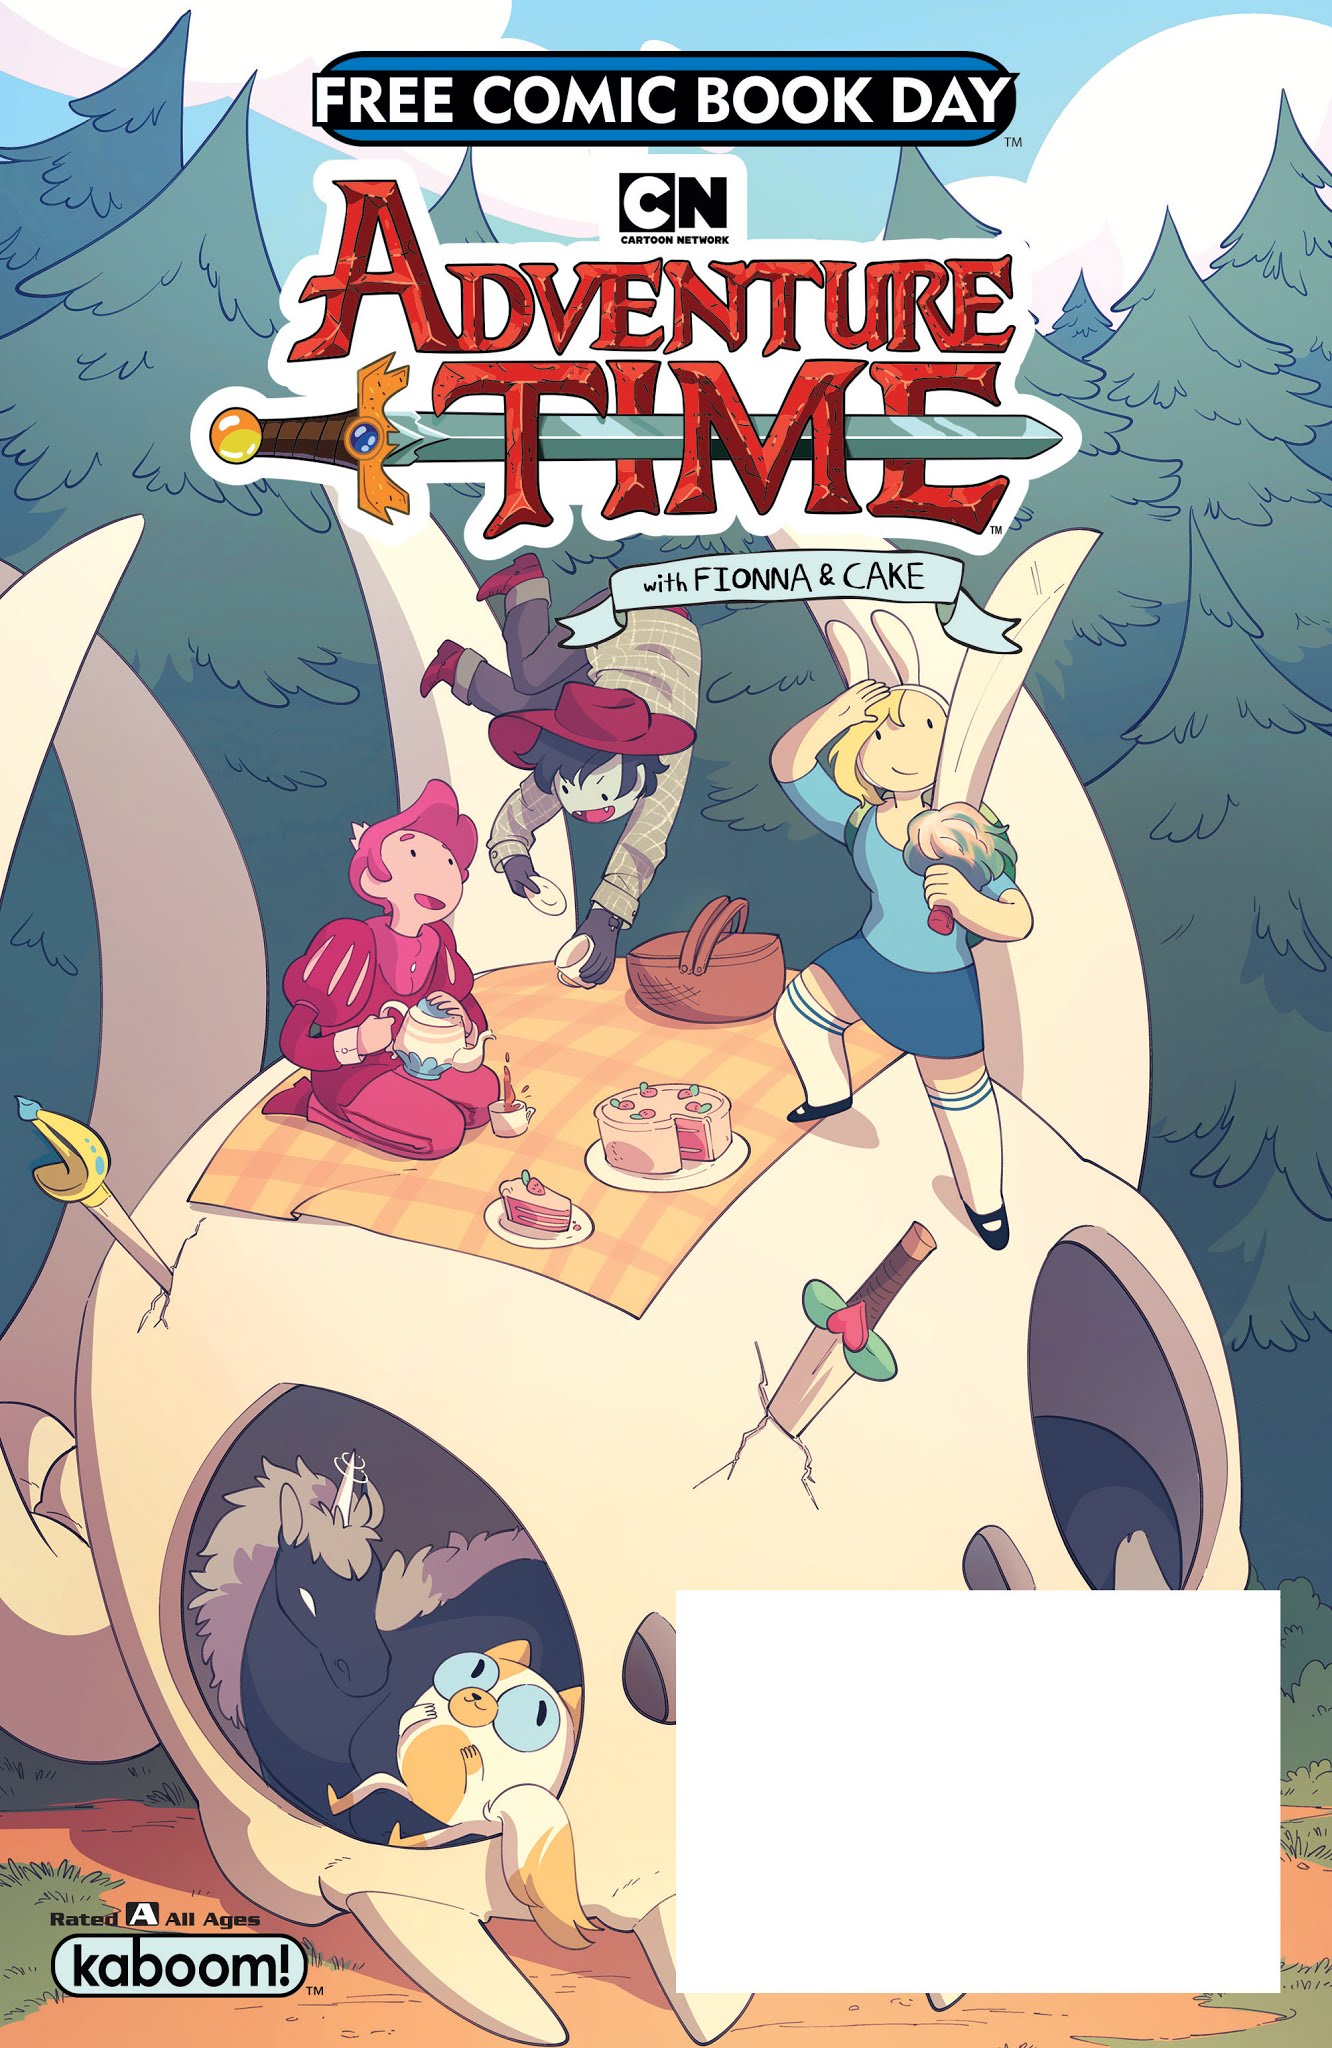 Read online Free Comic Book Day 2018 comic -  Issue # Adventure Time with Fionna and Cake - 1